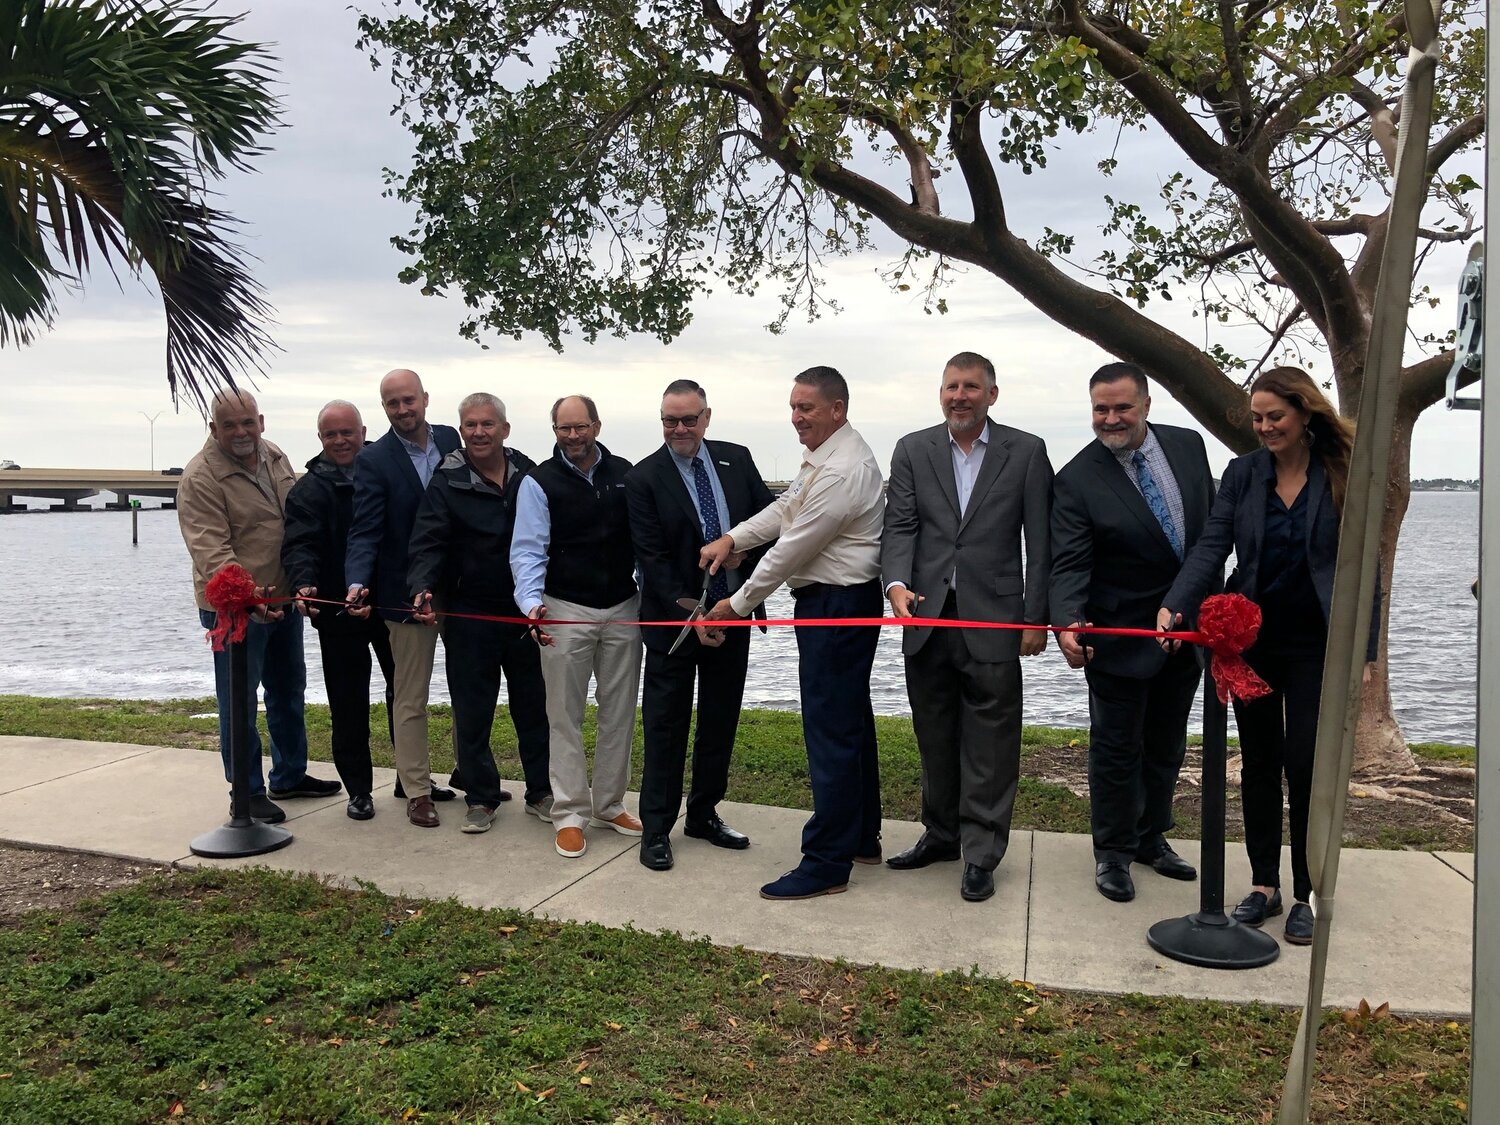 On Jan. 11, the South Florida Water Management District celebrated the ribbon cutting ceremony for the Caloosahatchee Connect Project in the City of Cape Coral.